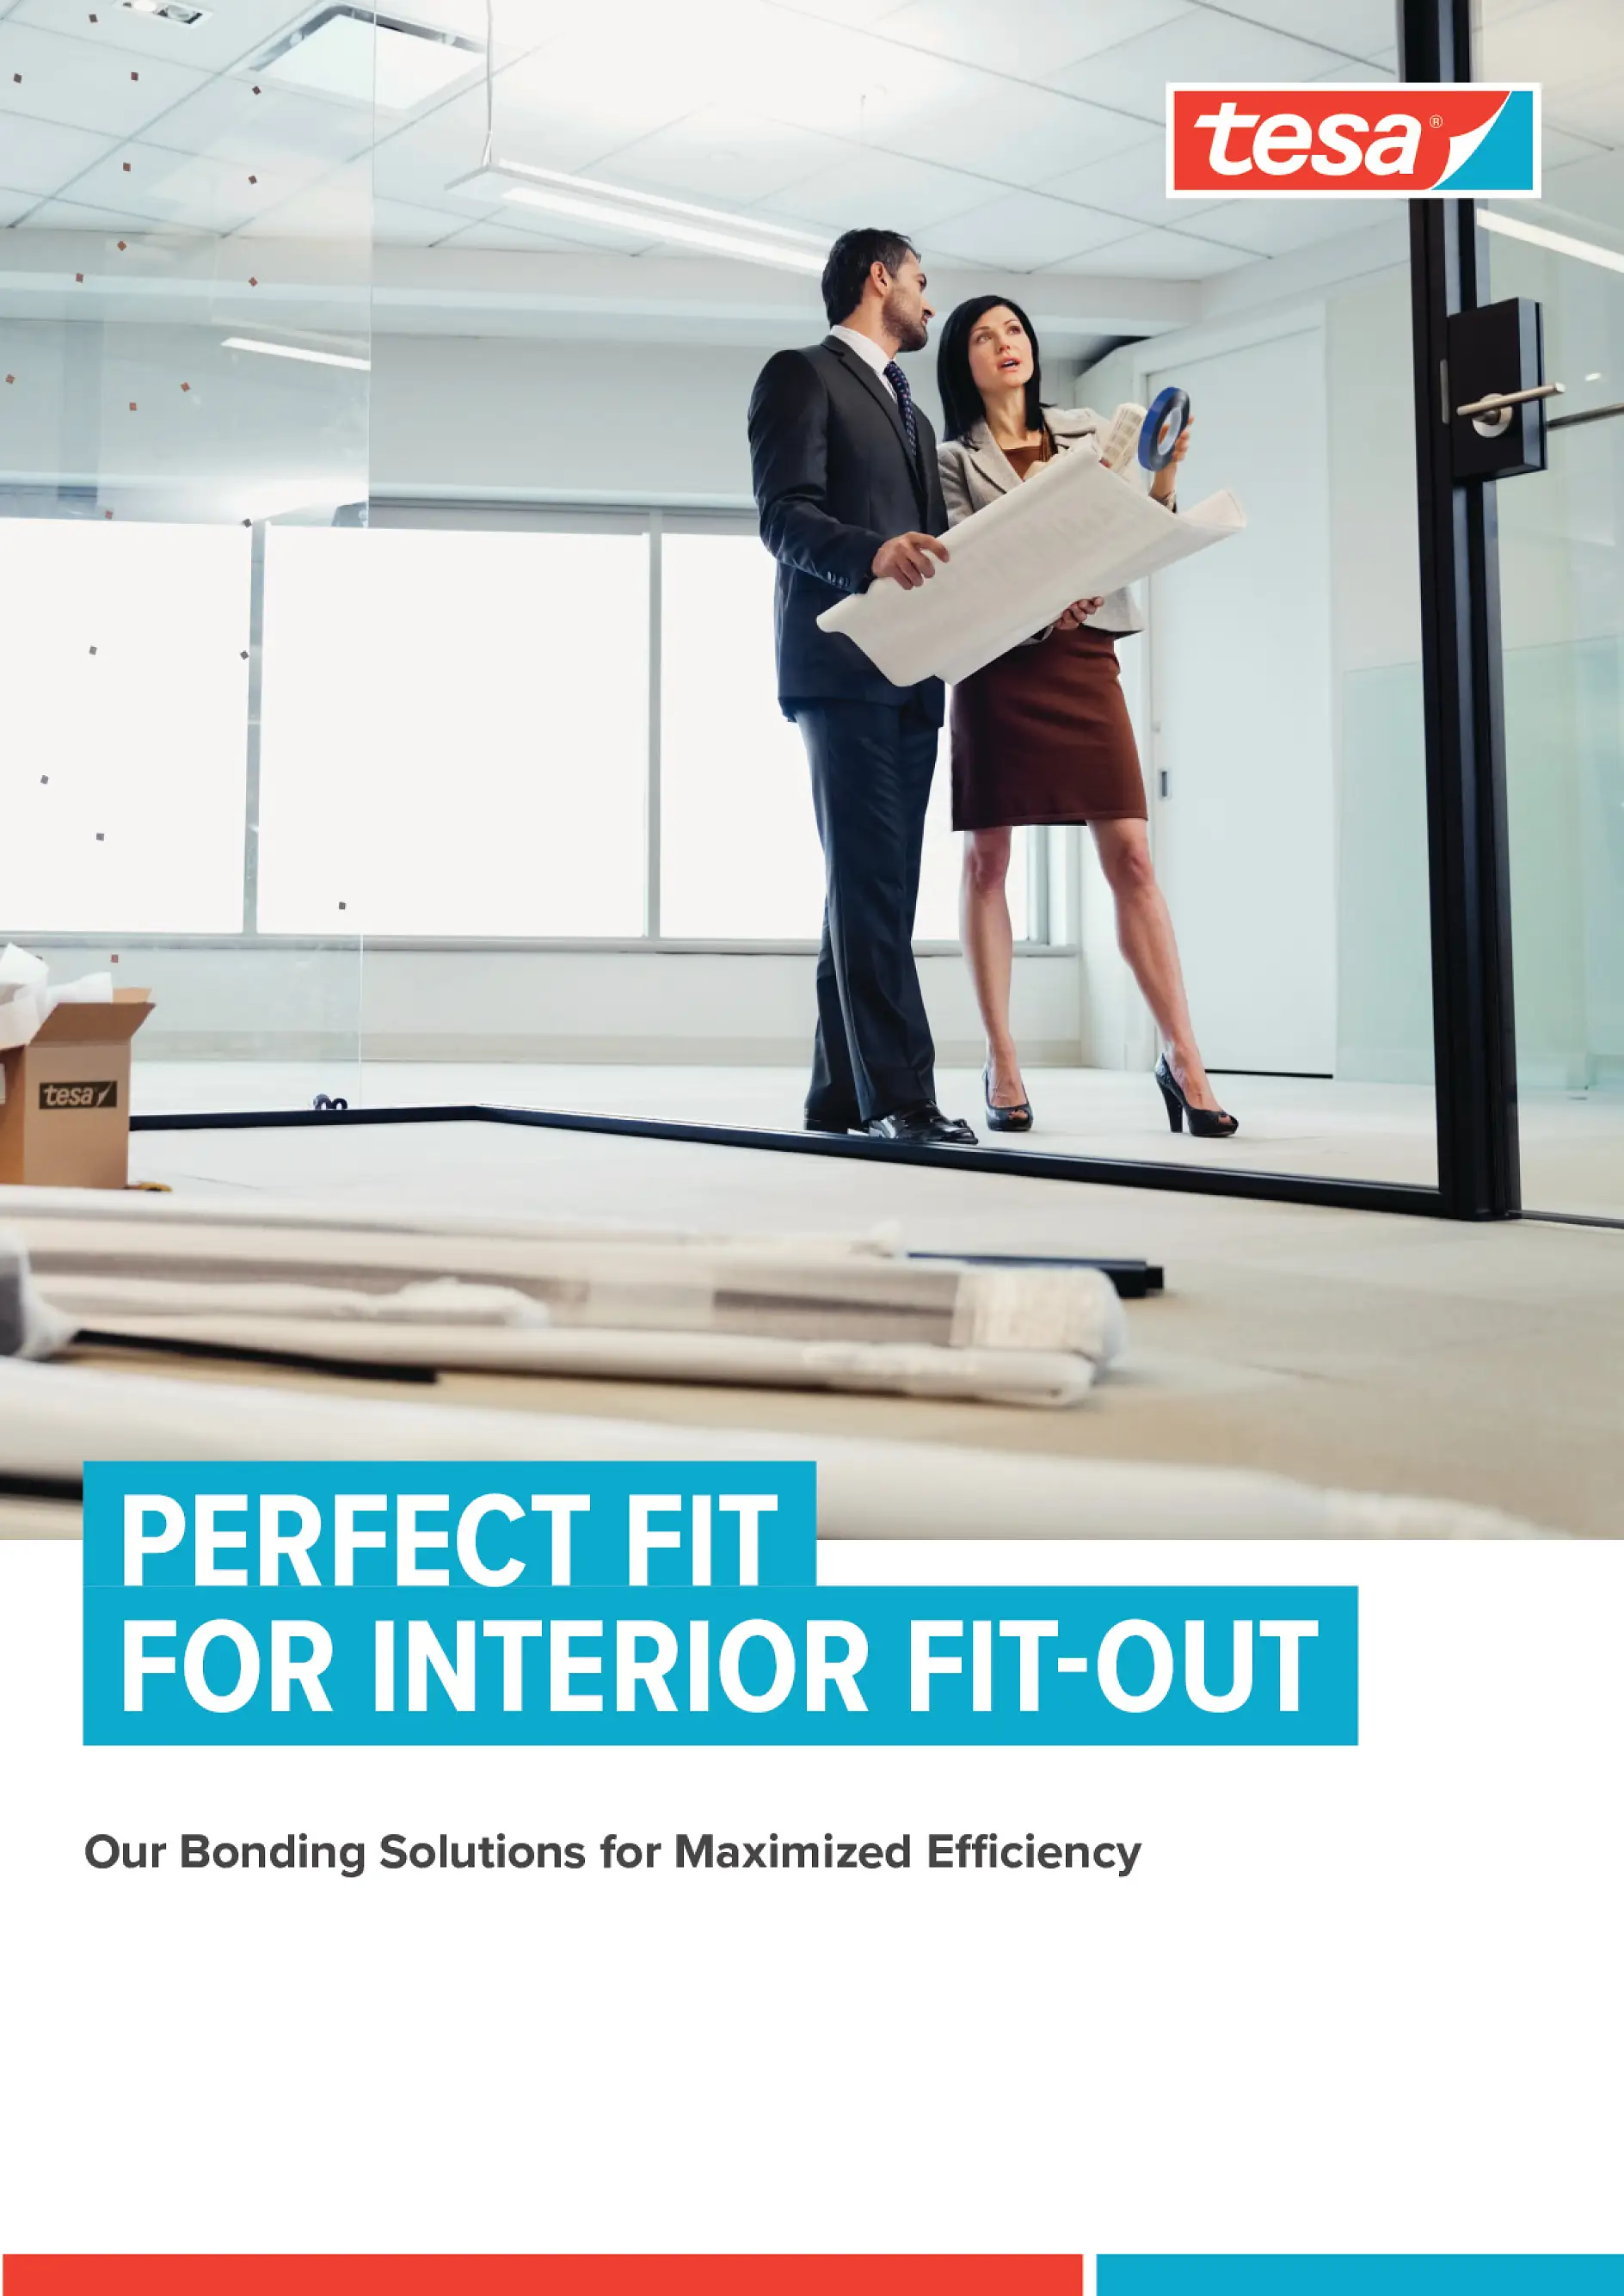 An overview of our solutions in the interior fit-out market.